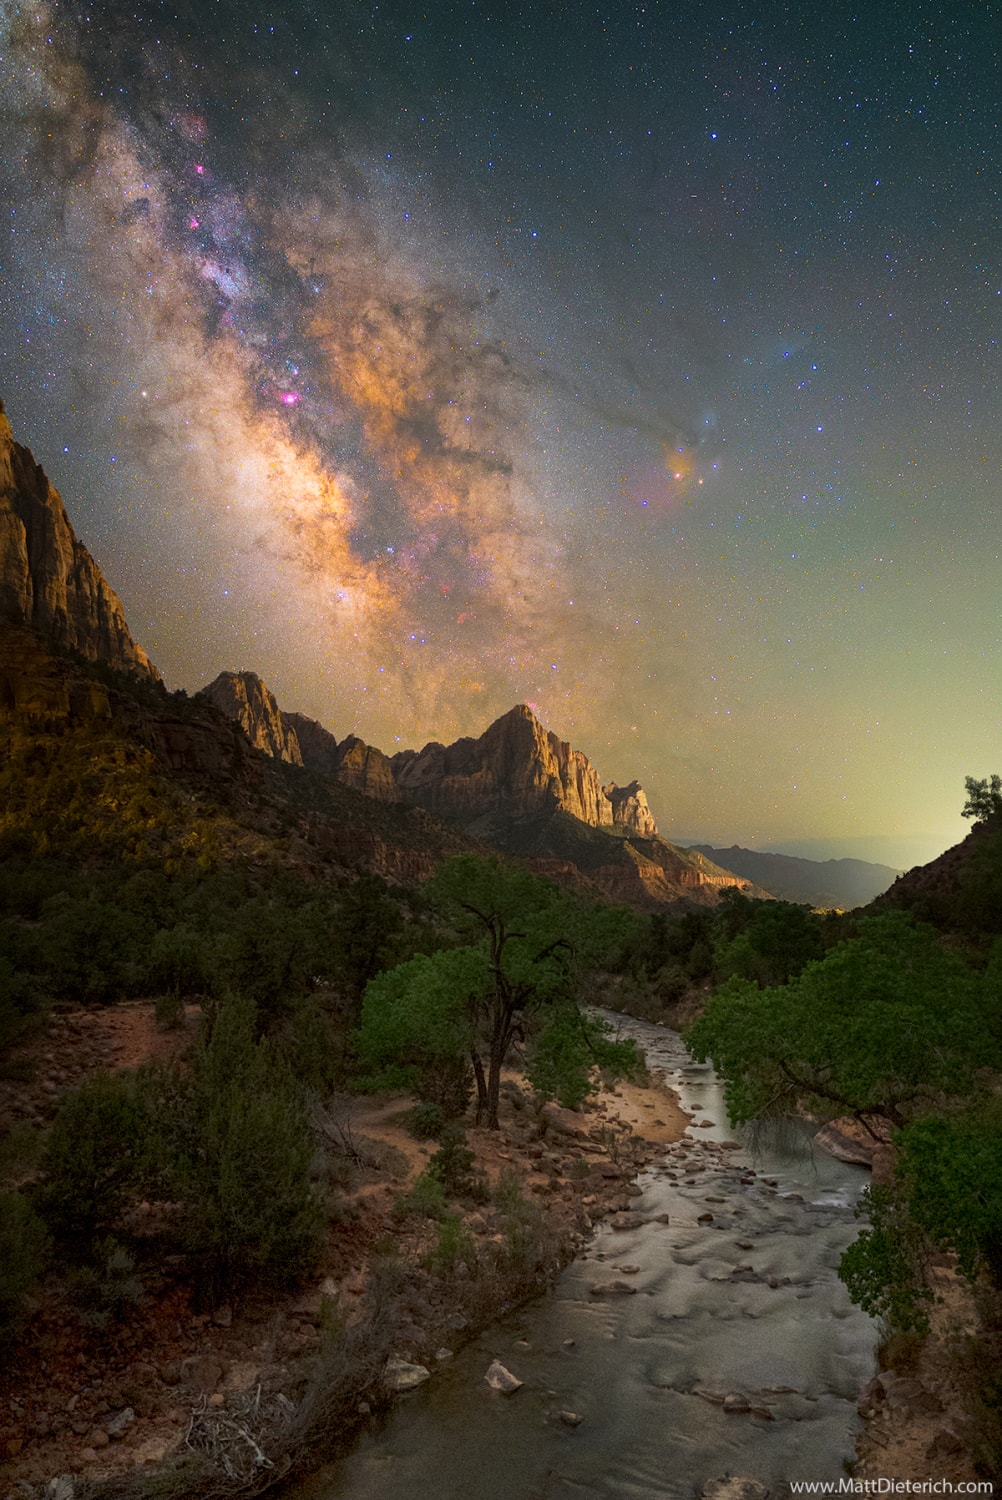 Zion National Park night skies are amazing, so I captured this deep exposure to show the Milky Way